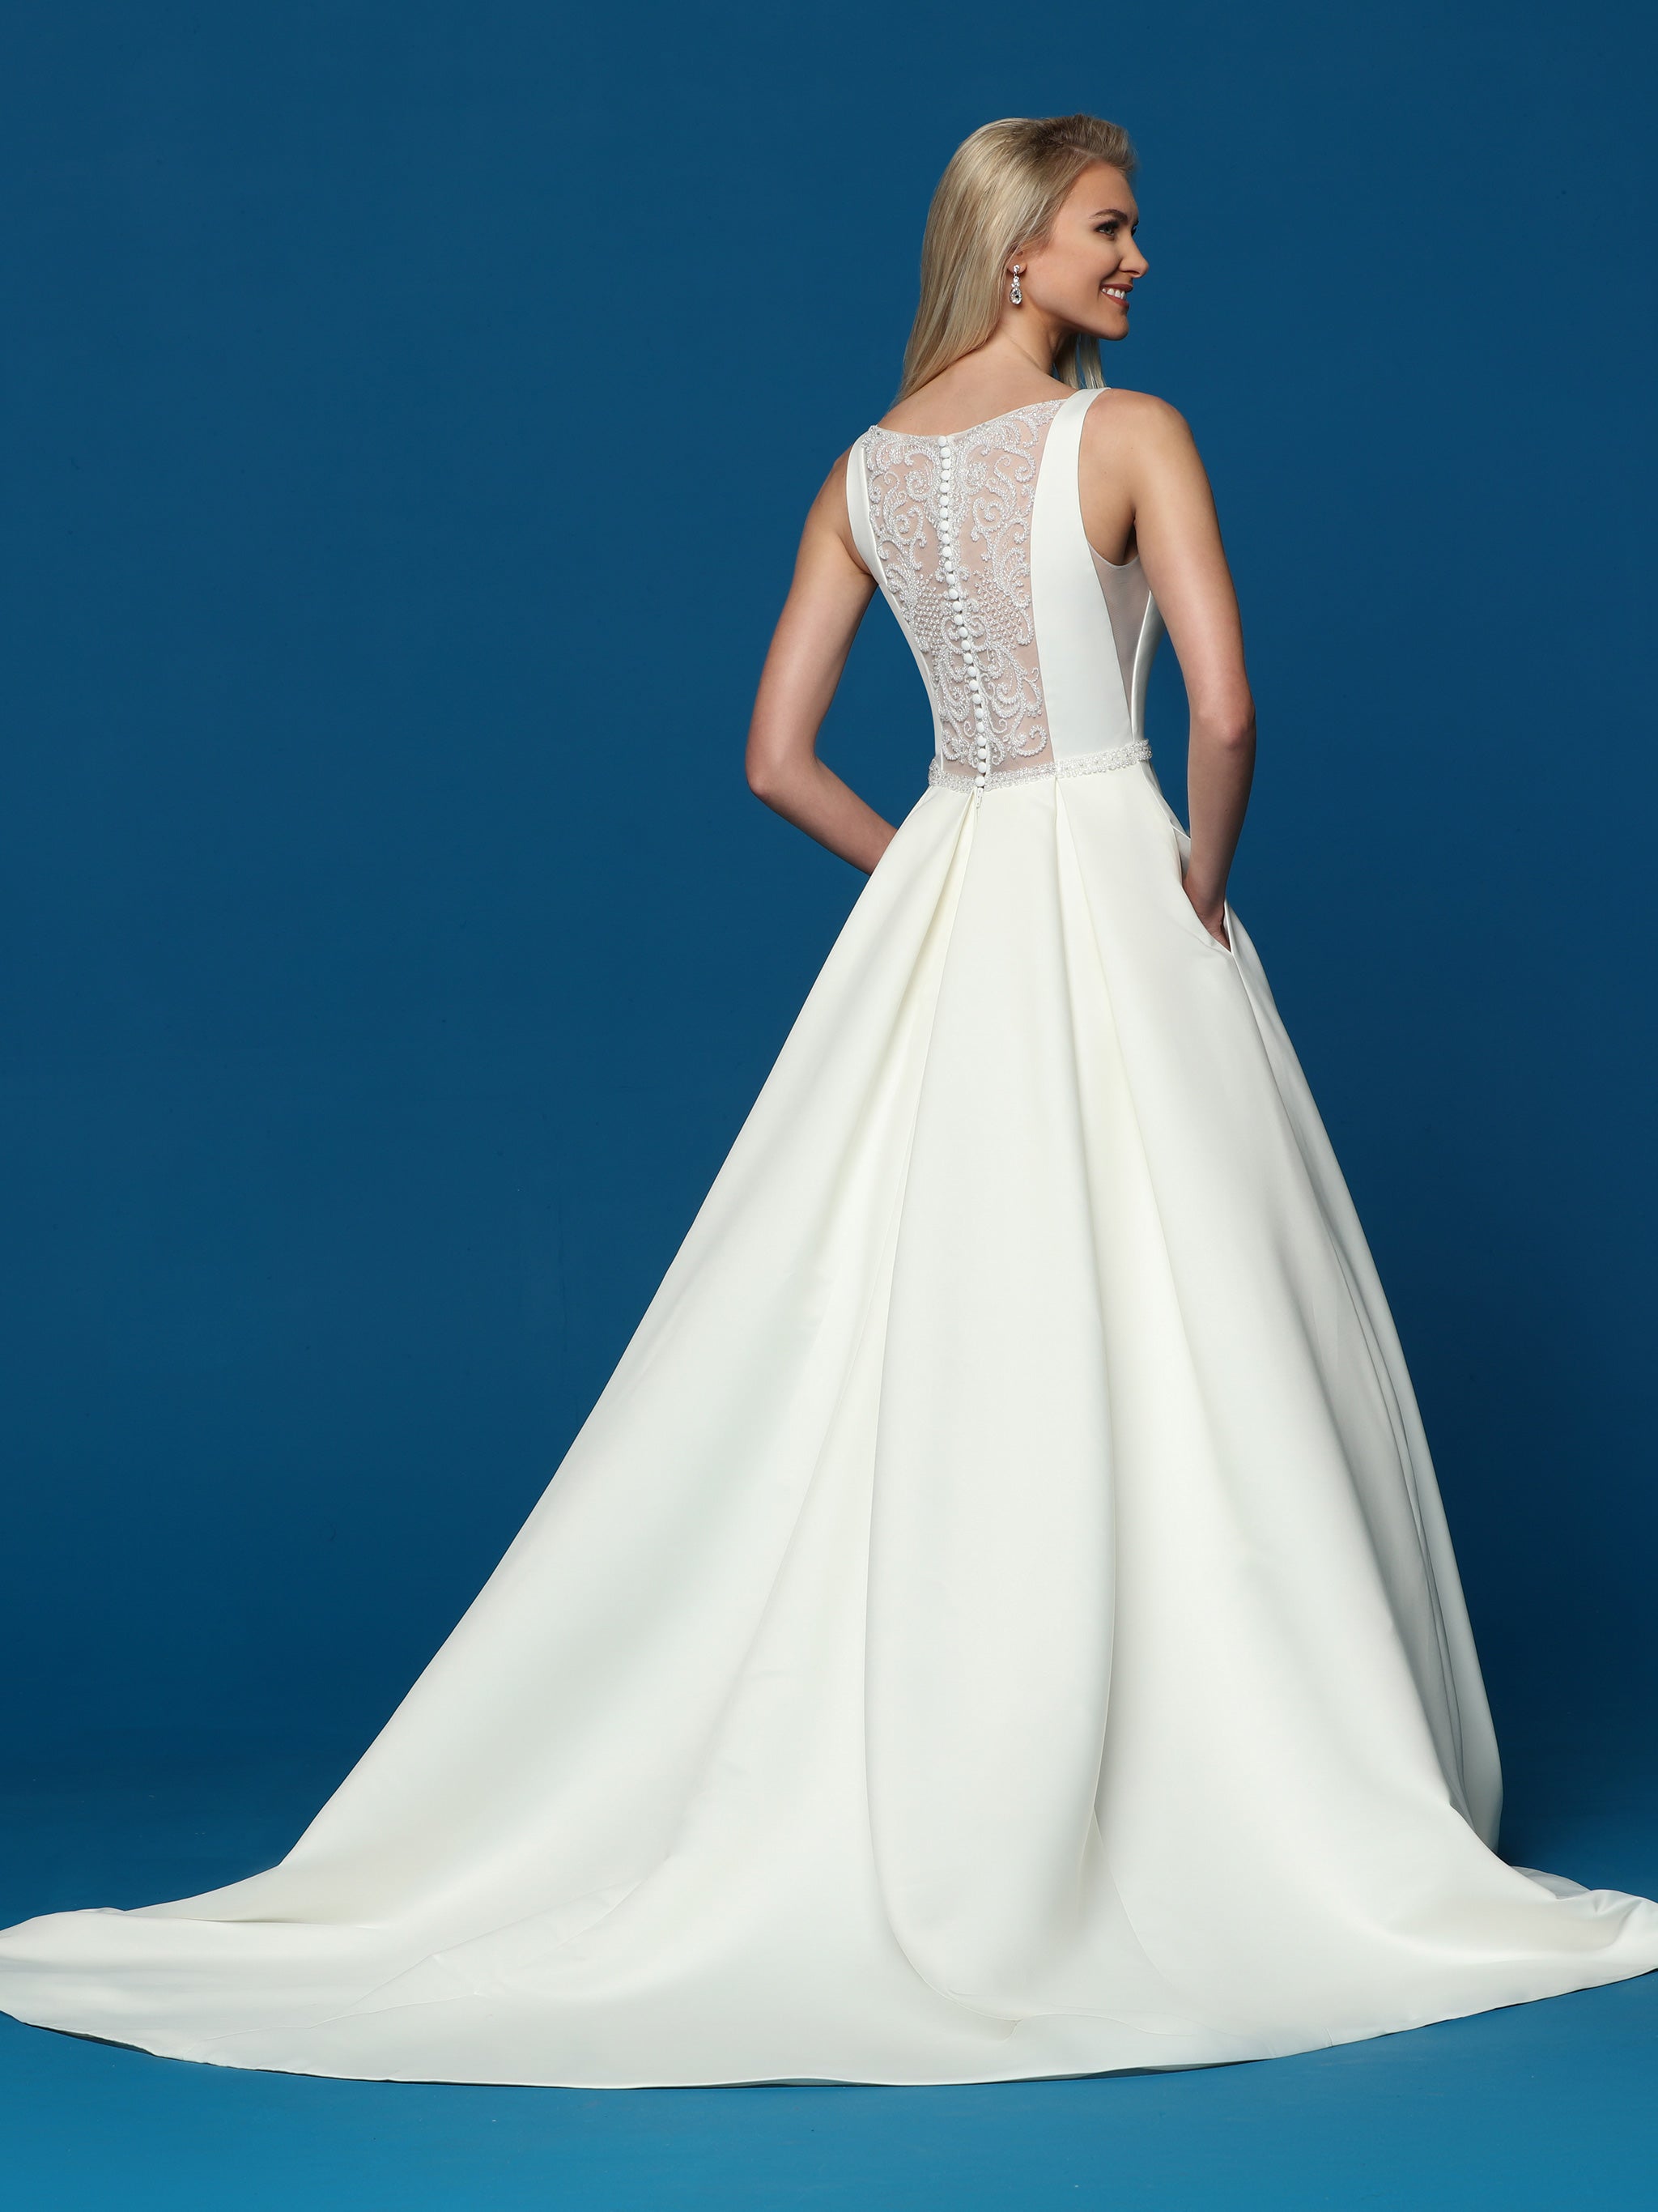 Bridal Gowns - News, Tips & Guides | Glamour